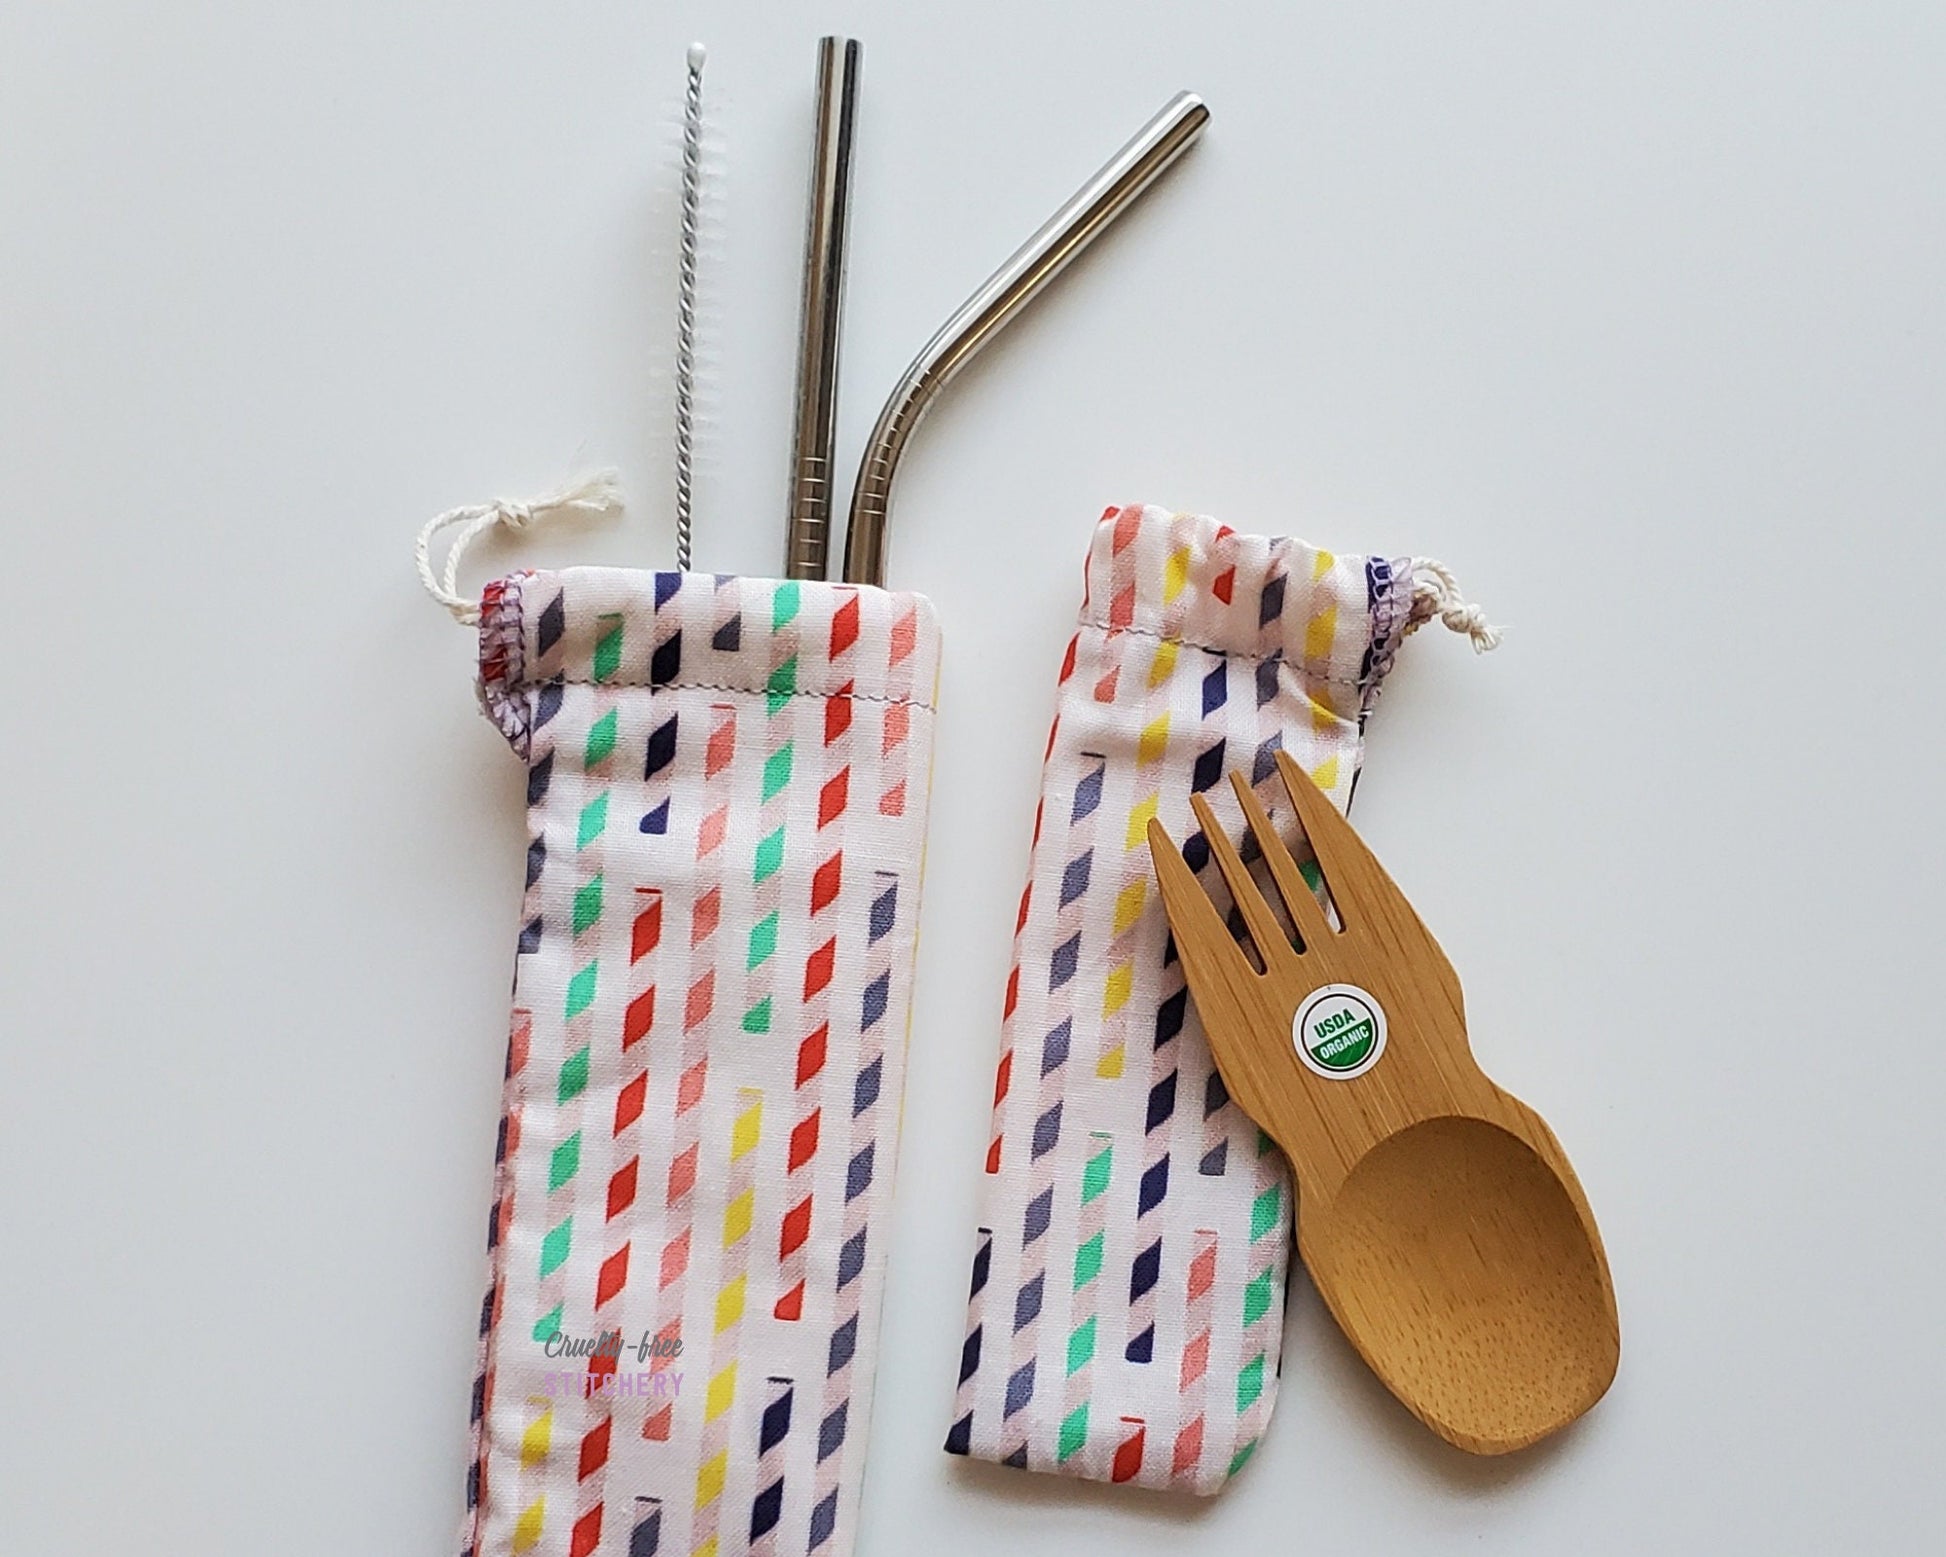 Reusable bamboo spork and stainless steel straw pouch set. The pouches are both white with small striped paper straws printed on them. The paper straws are swirled with white and various colors like blue, red, pink, and yellow.